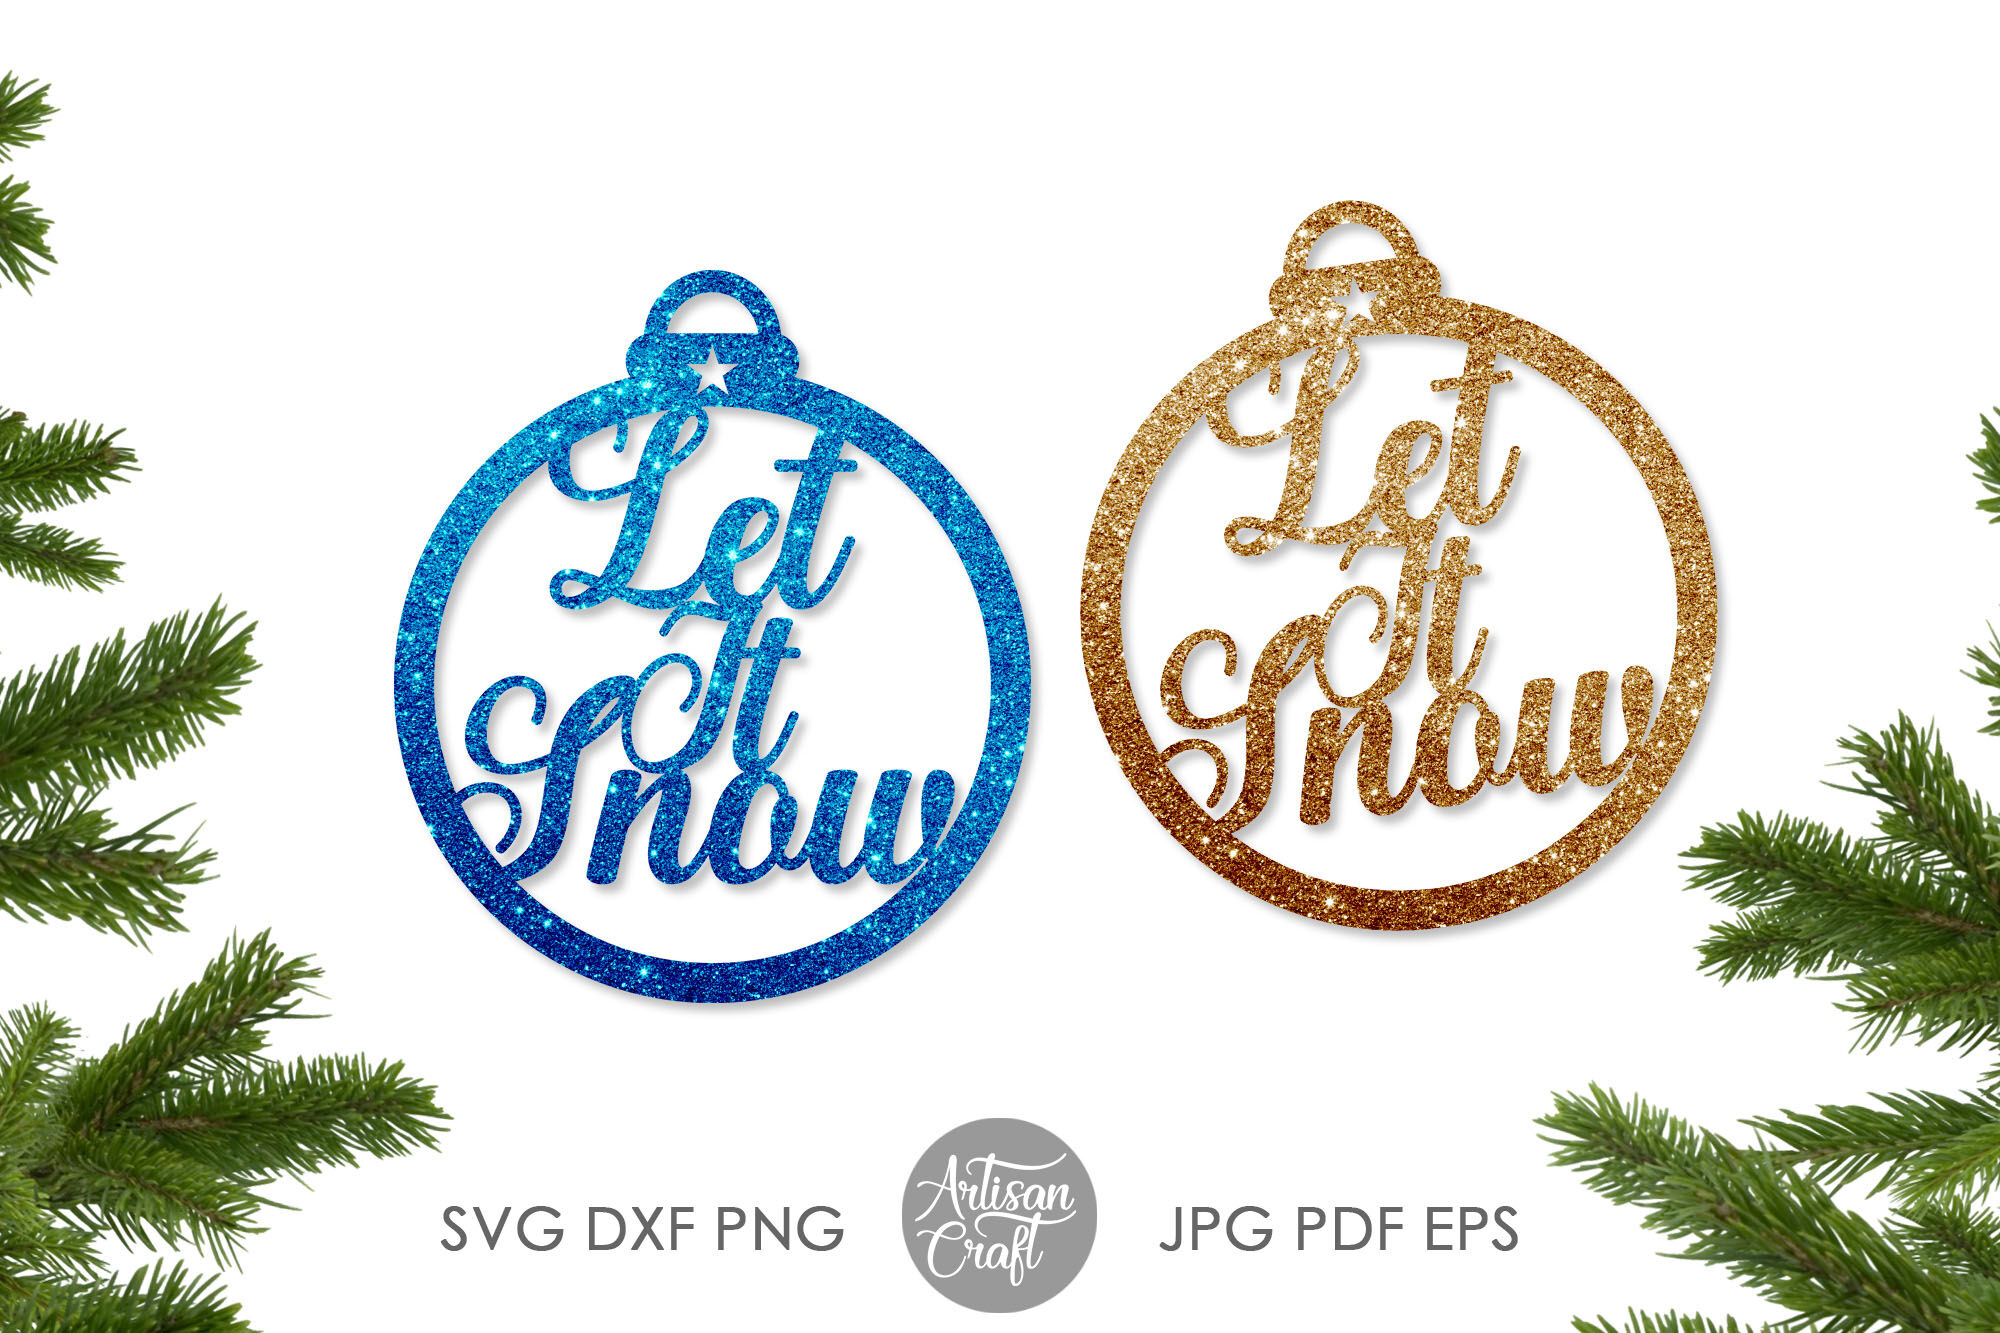 Download Let It Snow Christmas Ornaments Single Line Svg By Artisan Craft Svg Thehungryjpeg Com